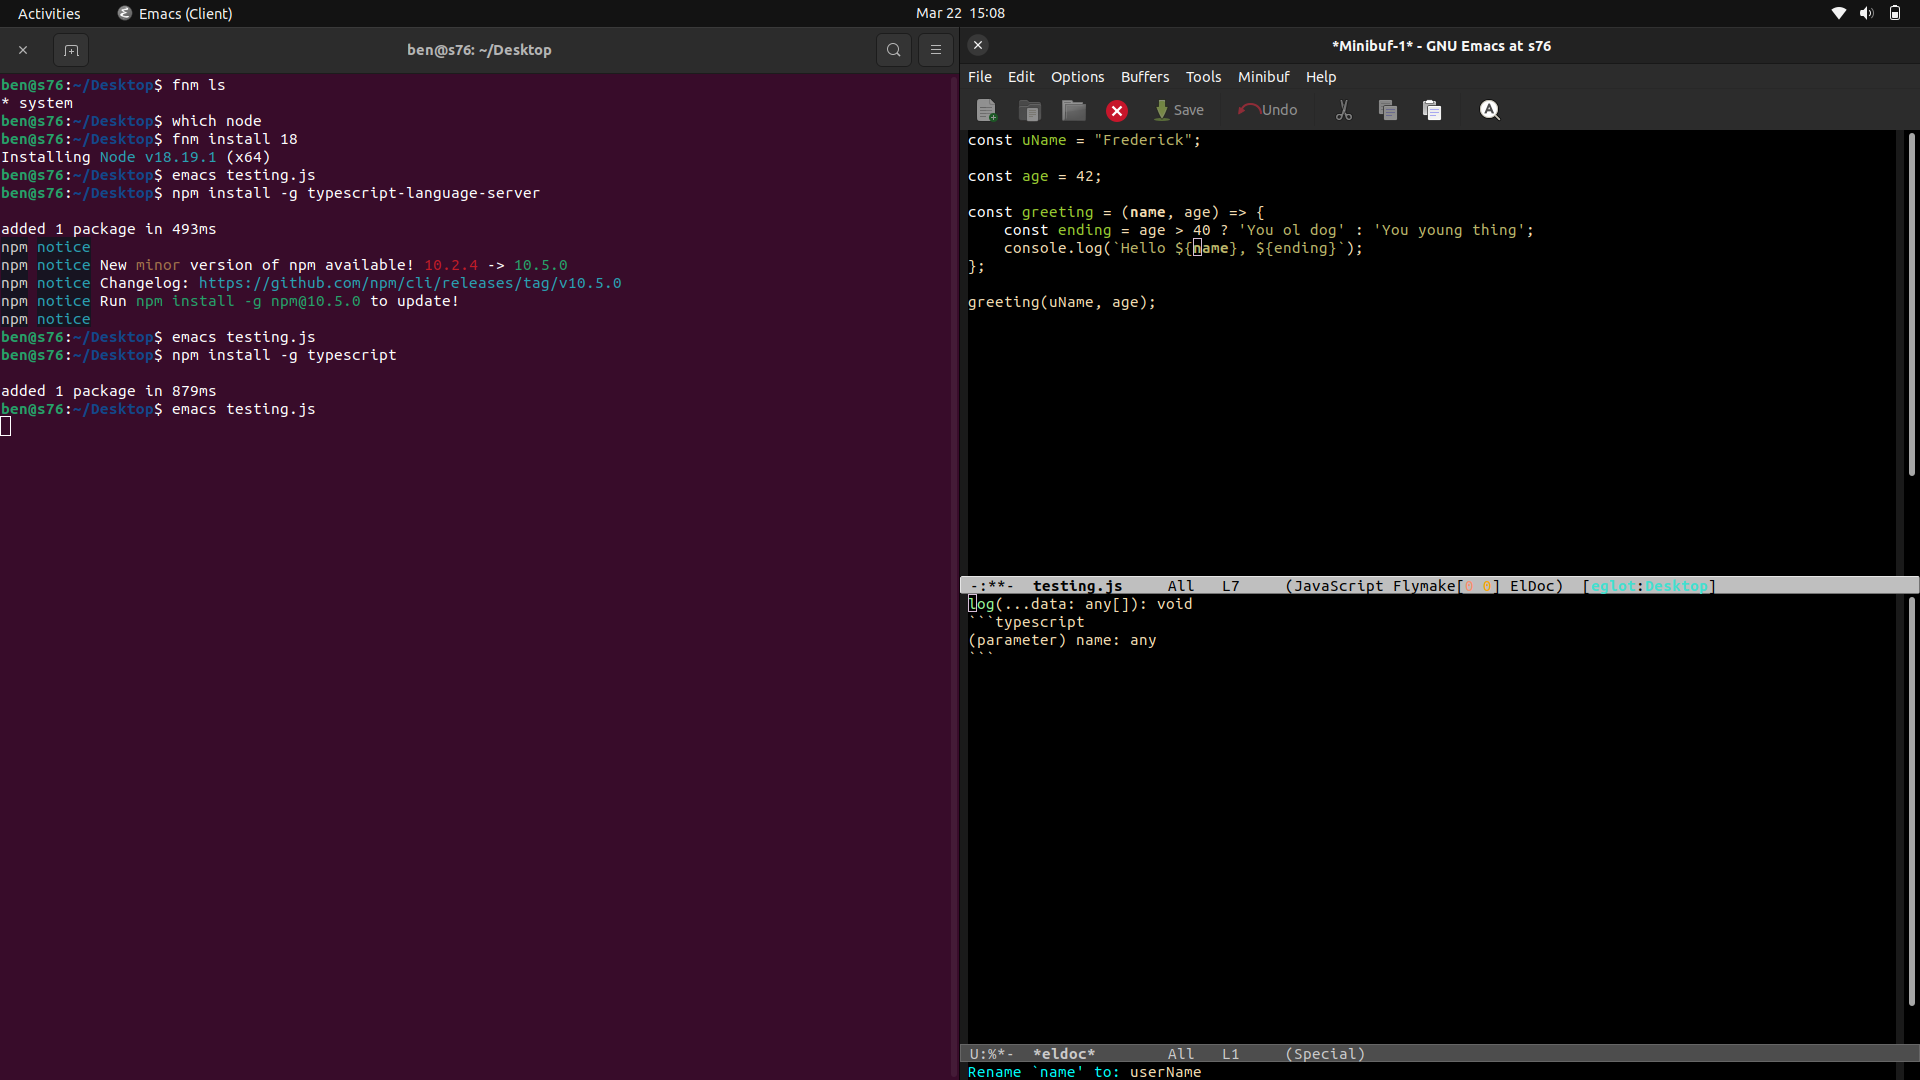 Screenshot of newly compiled Emacs showing syntax highlighting via tree-sitter and variable renaming via eglot.